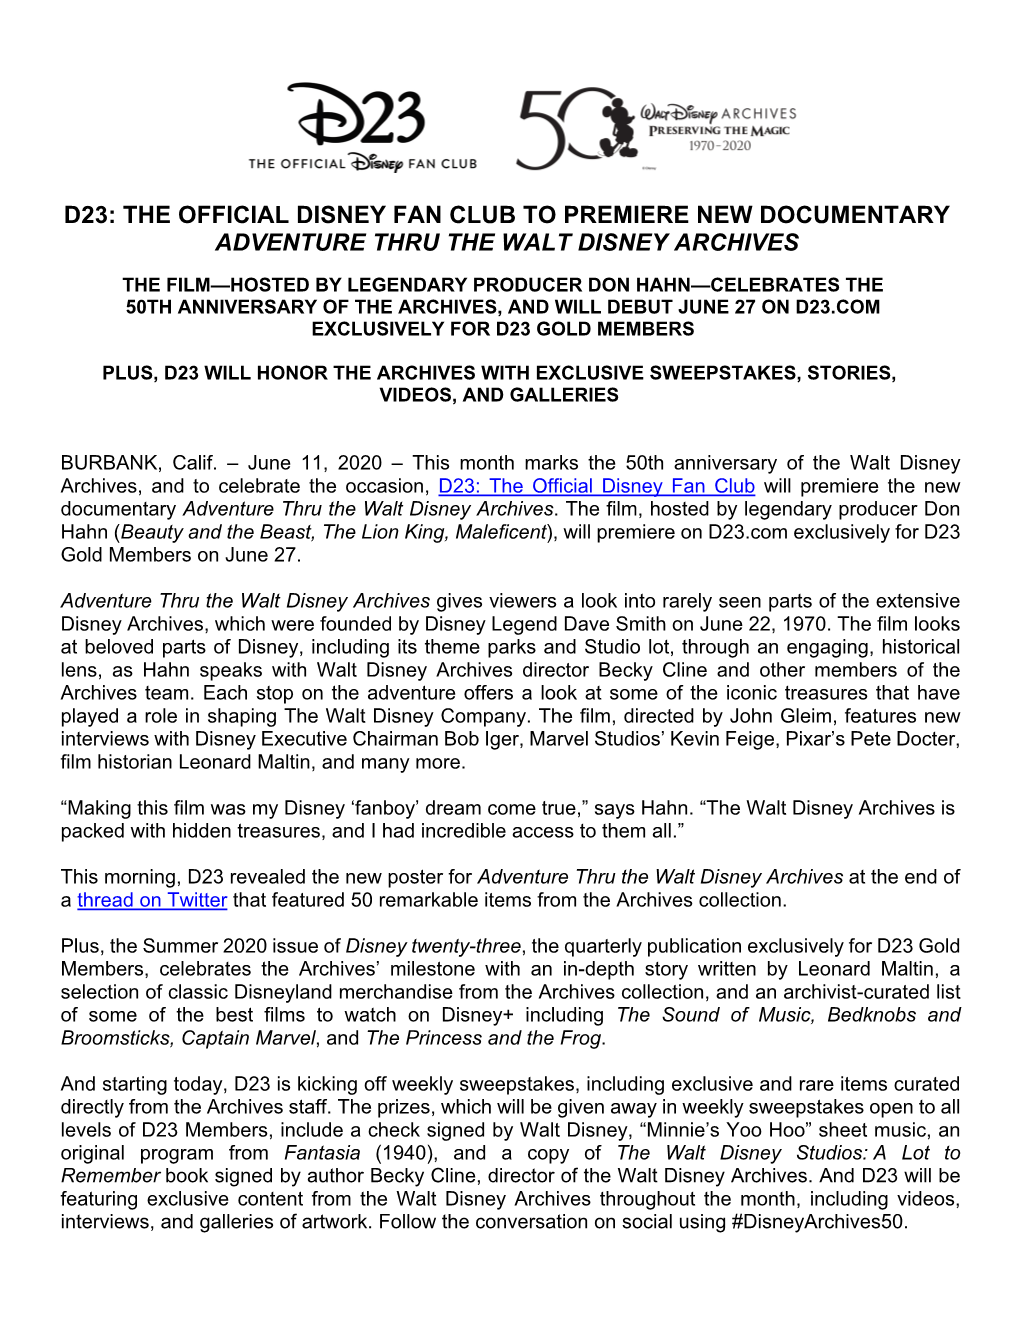 D23: the Official Disney Fan Club to Premiere New Documentary Adventure Thru the Walt Disney Archives